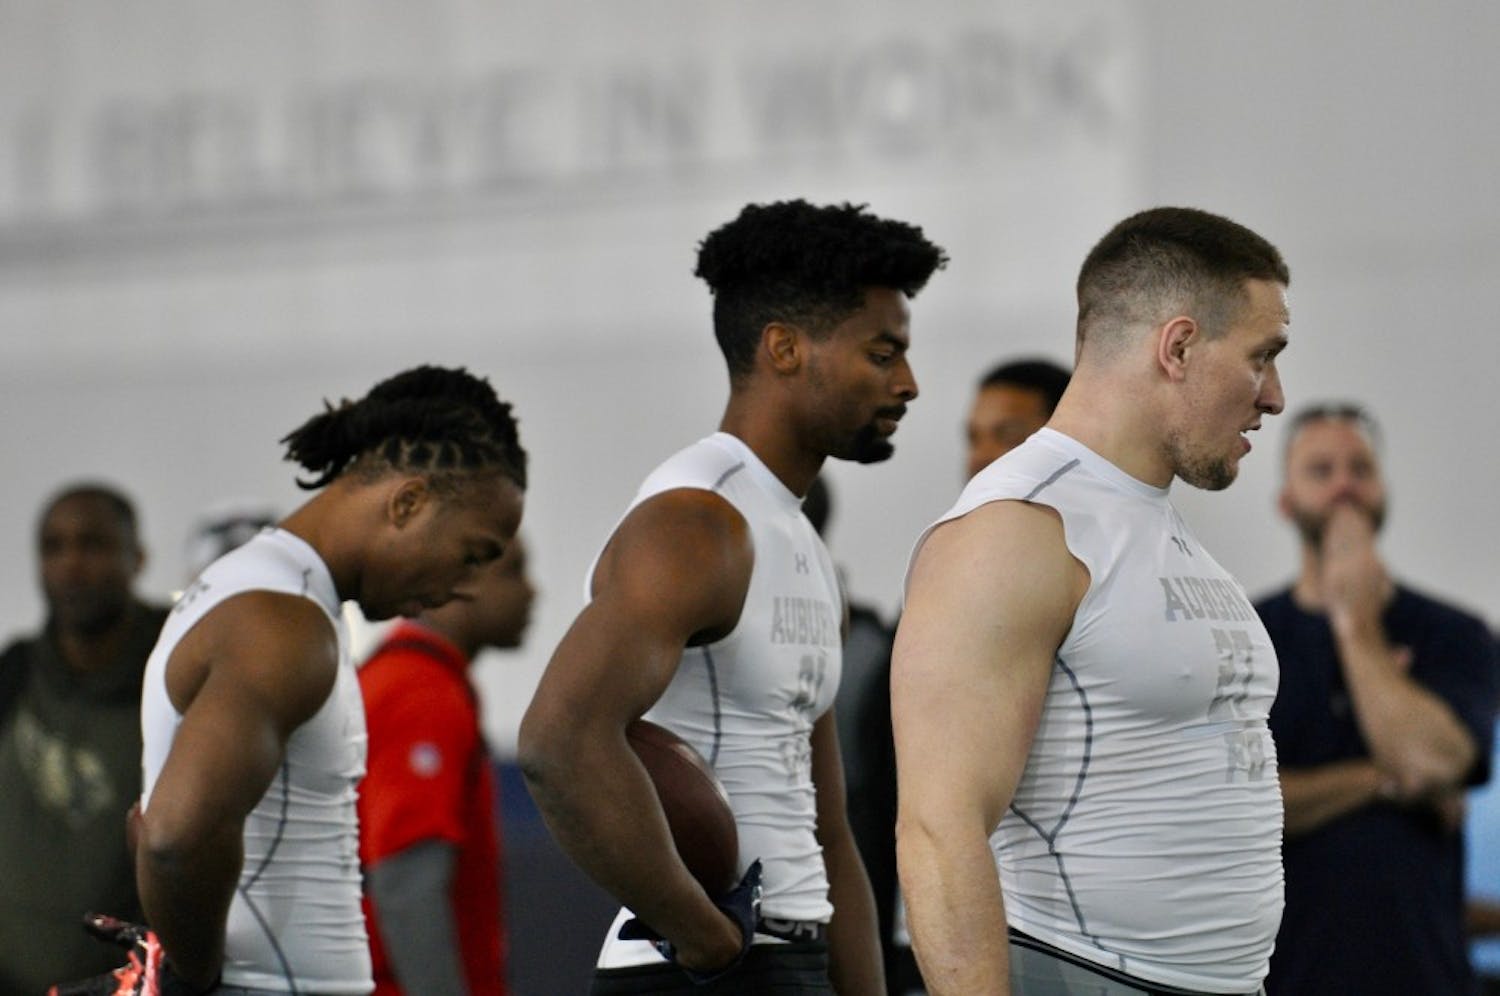 GALLERY: Pro Day 2019 | 3.8.19